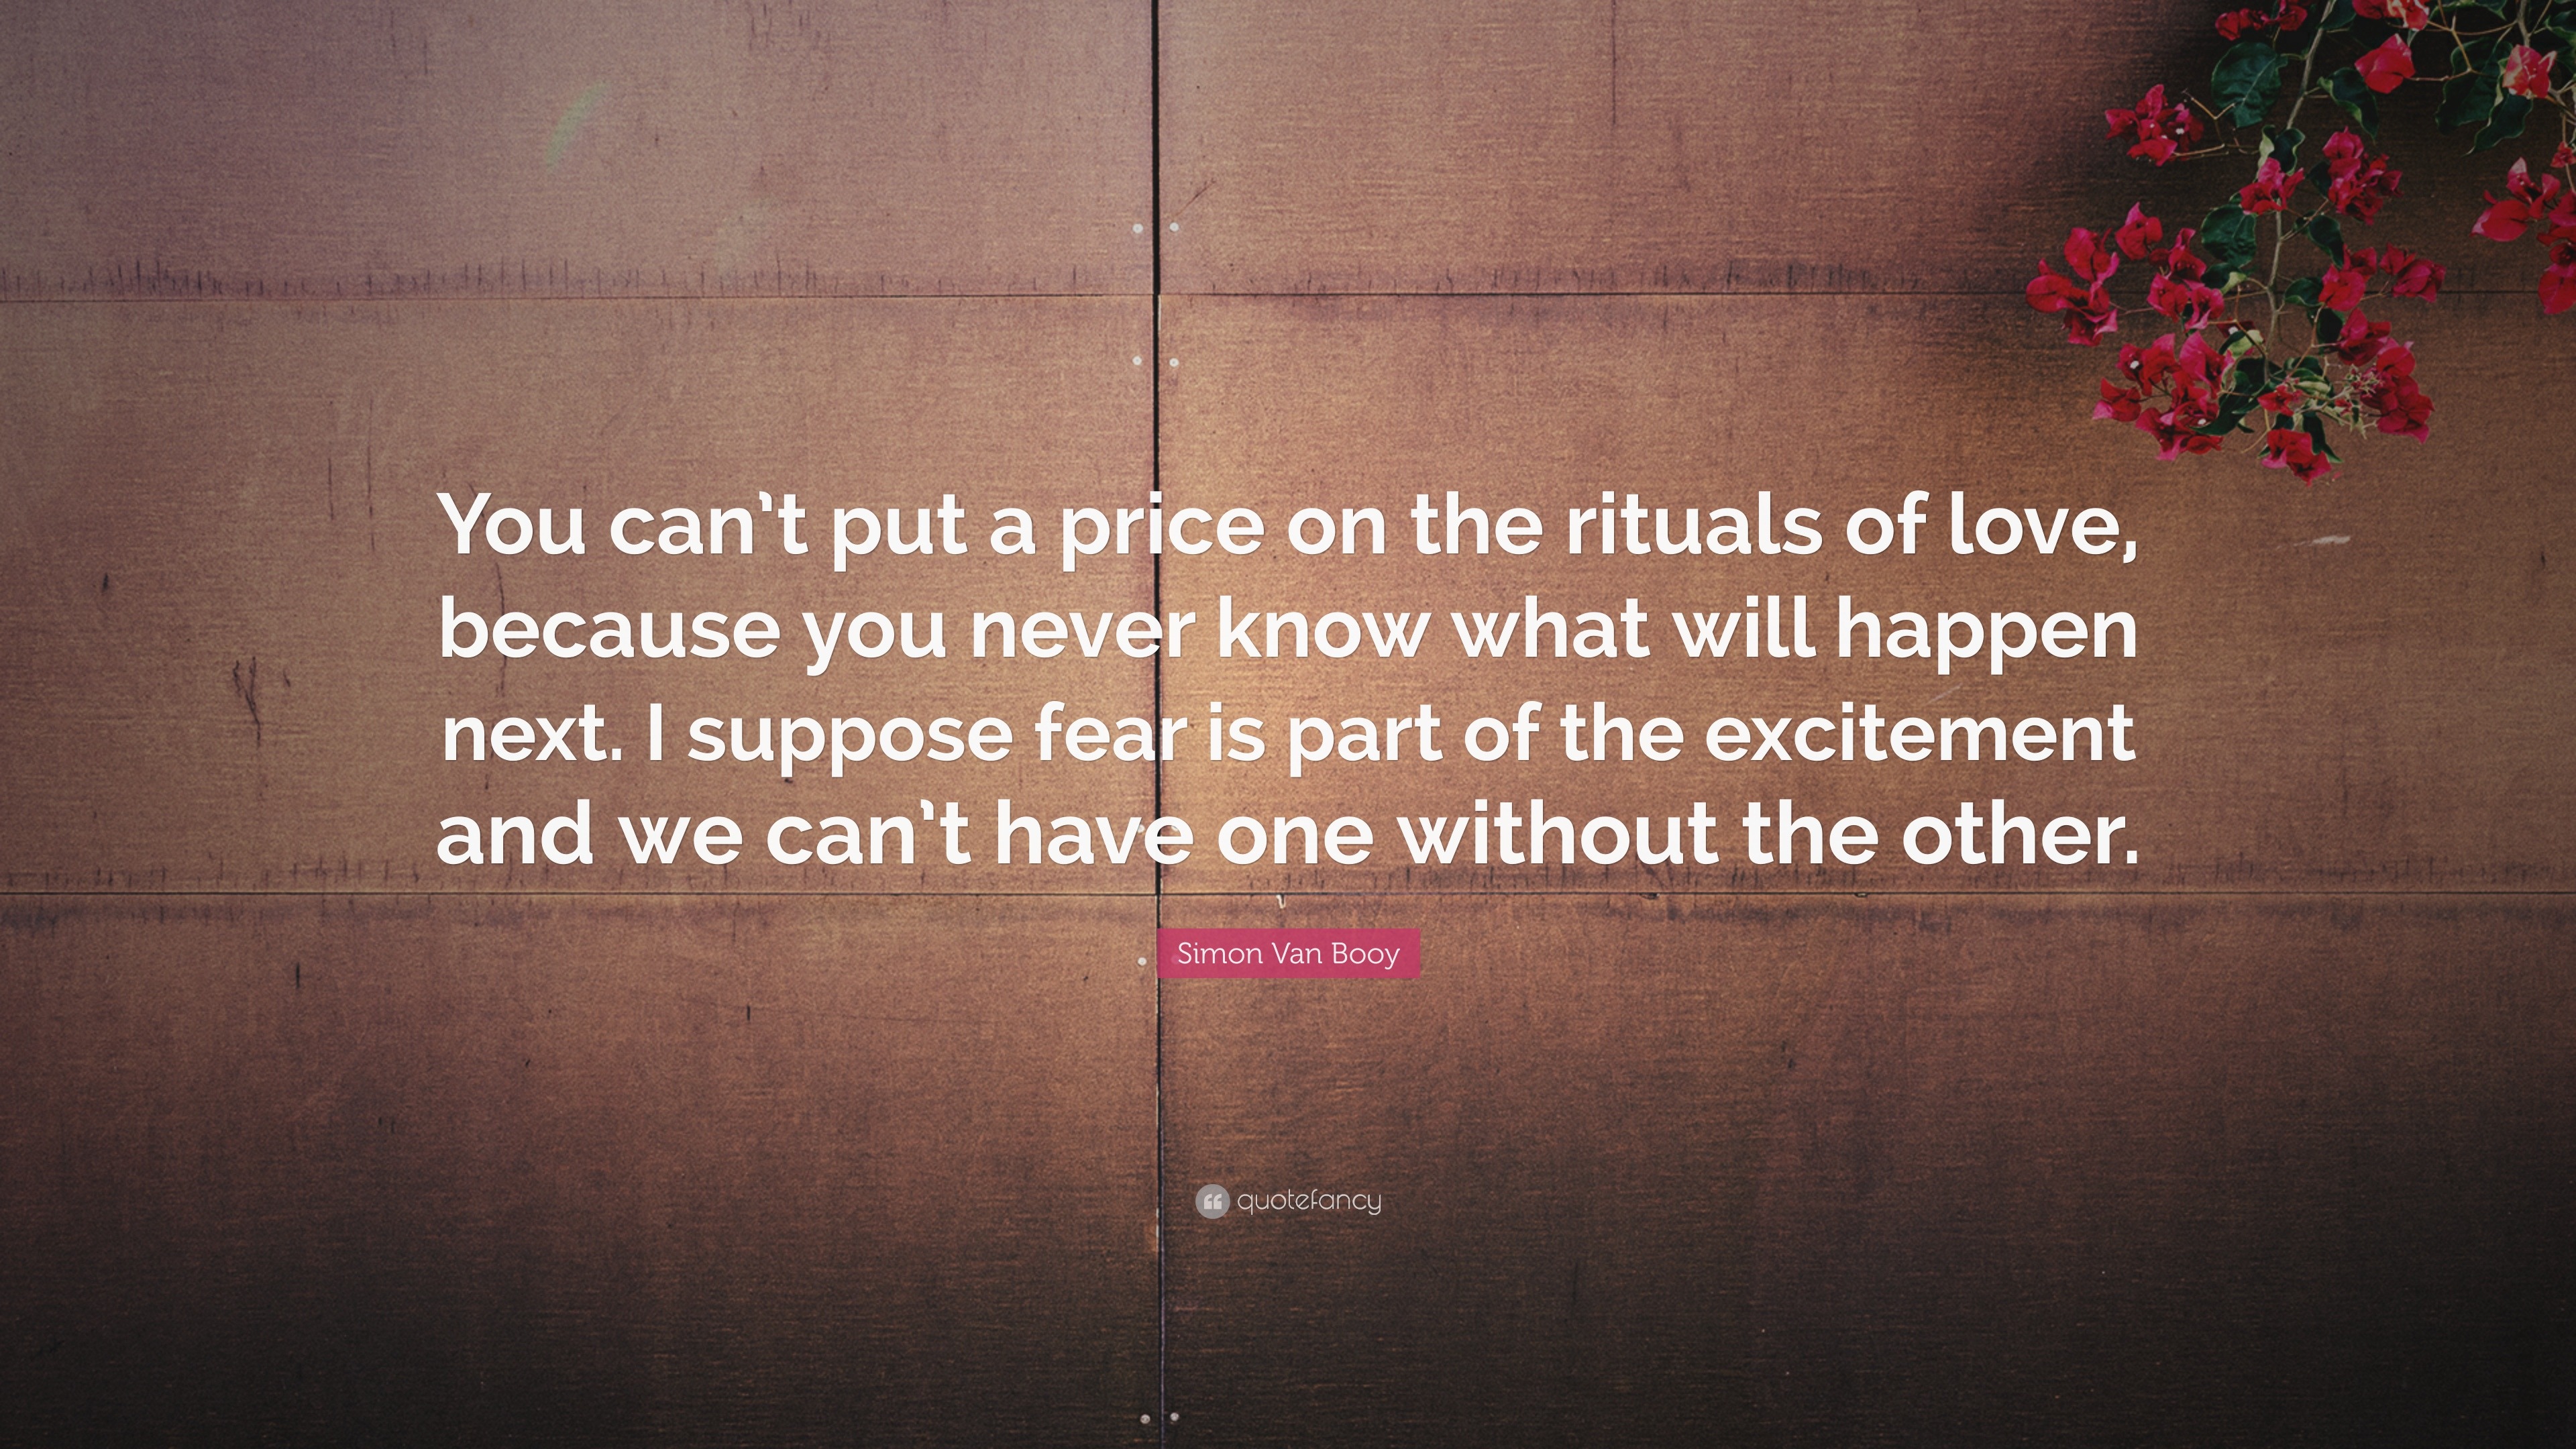 Simon Van Booy Quote: “You can’t put a price on the rituals of love ...